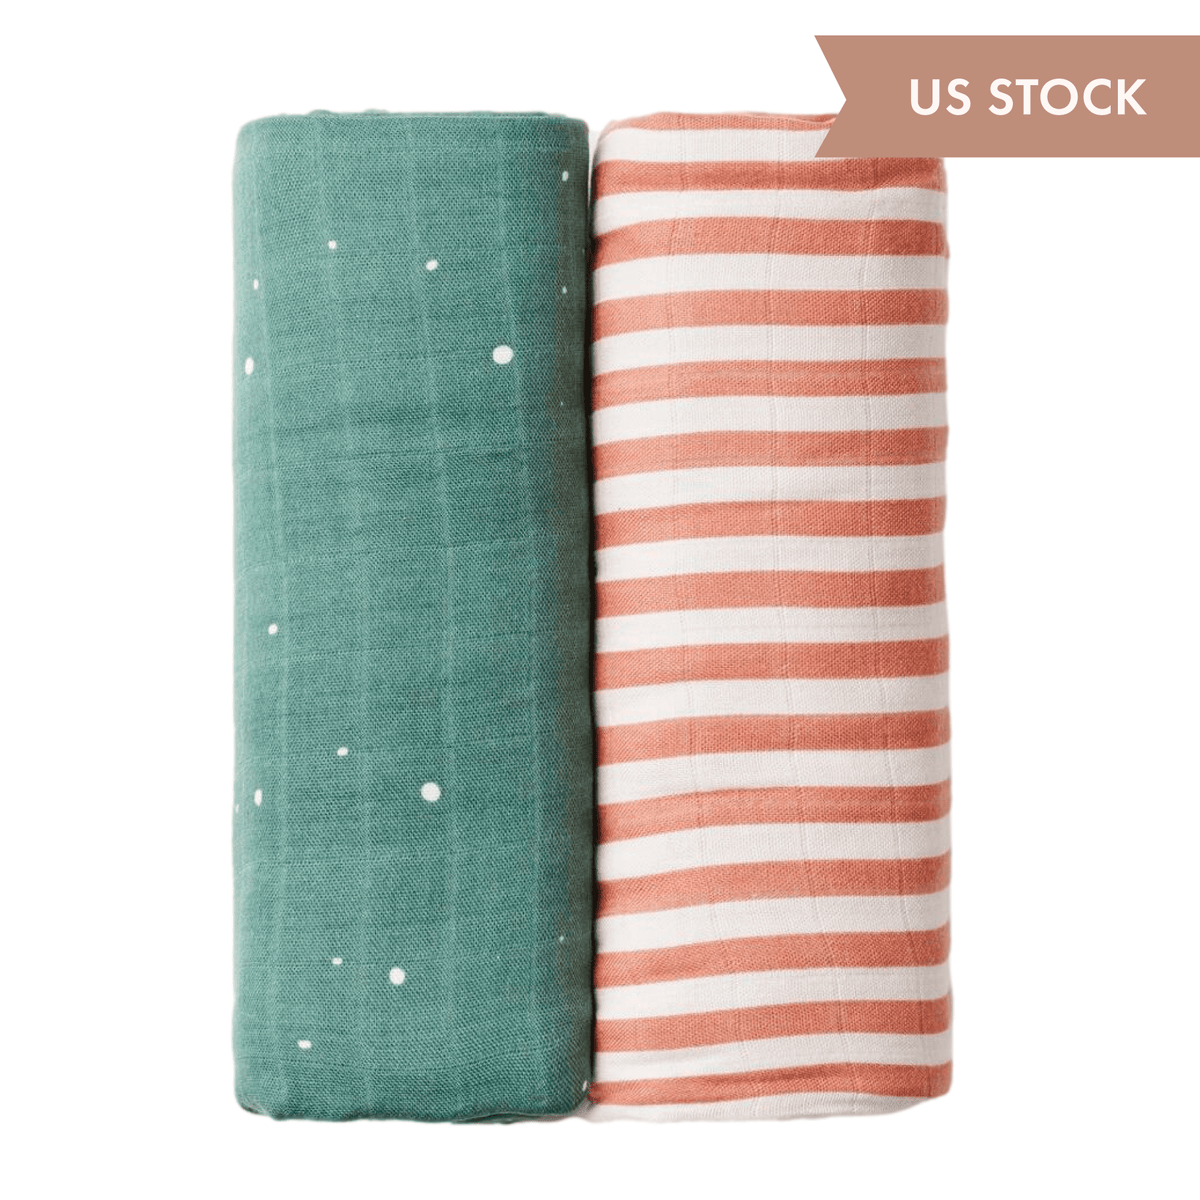 Muslin Swaddle Blankets - Pack of 2 - Starry/Floral/Stripes